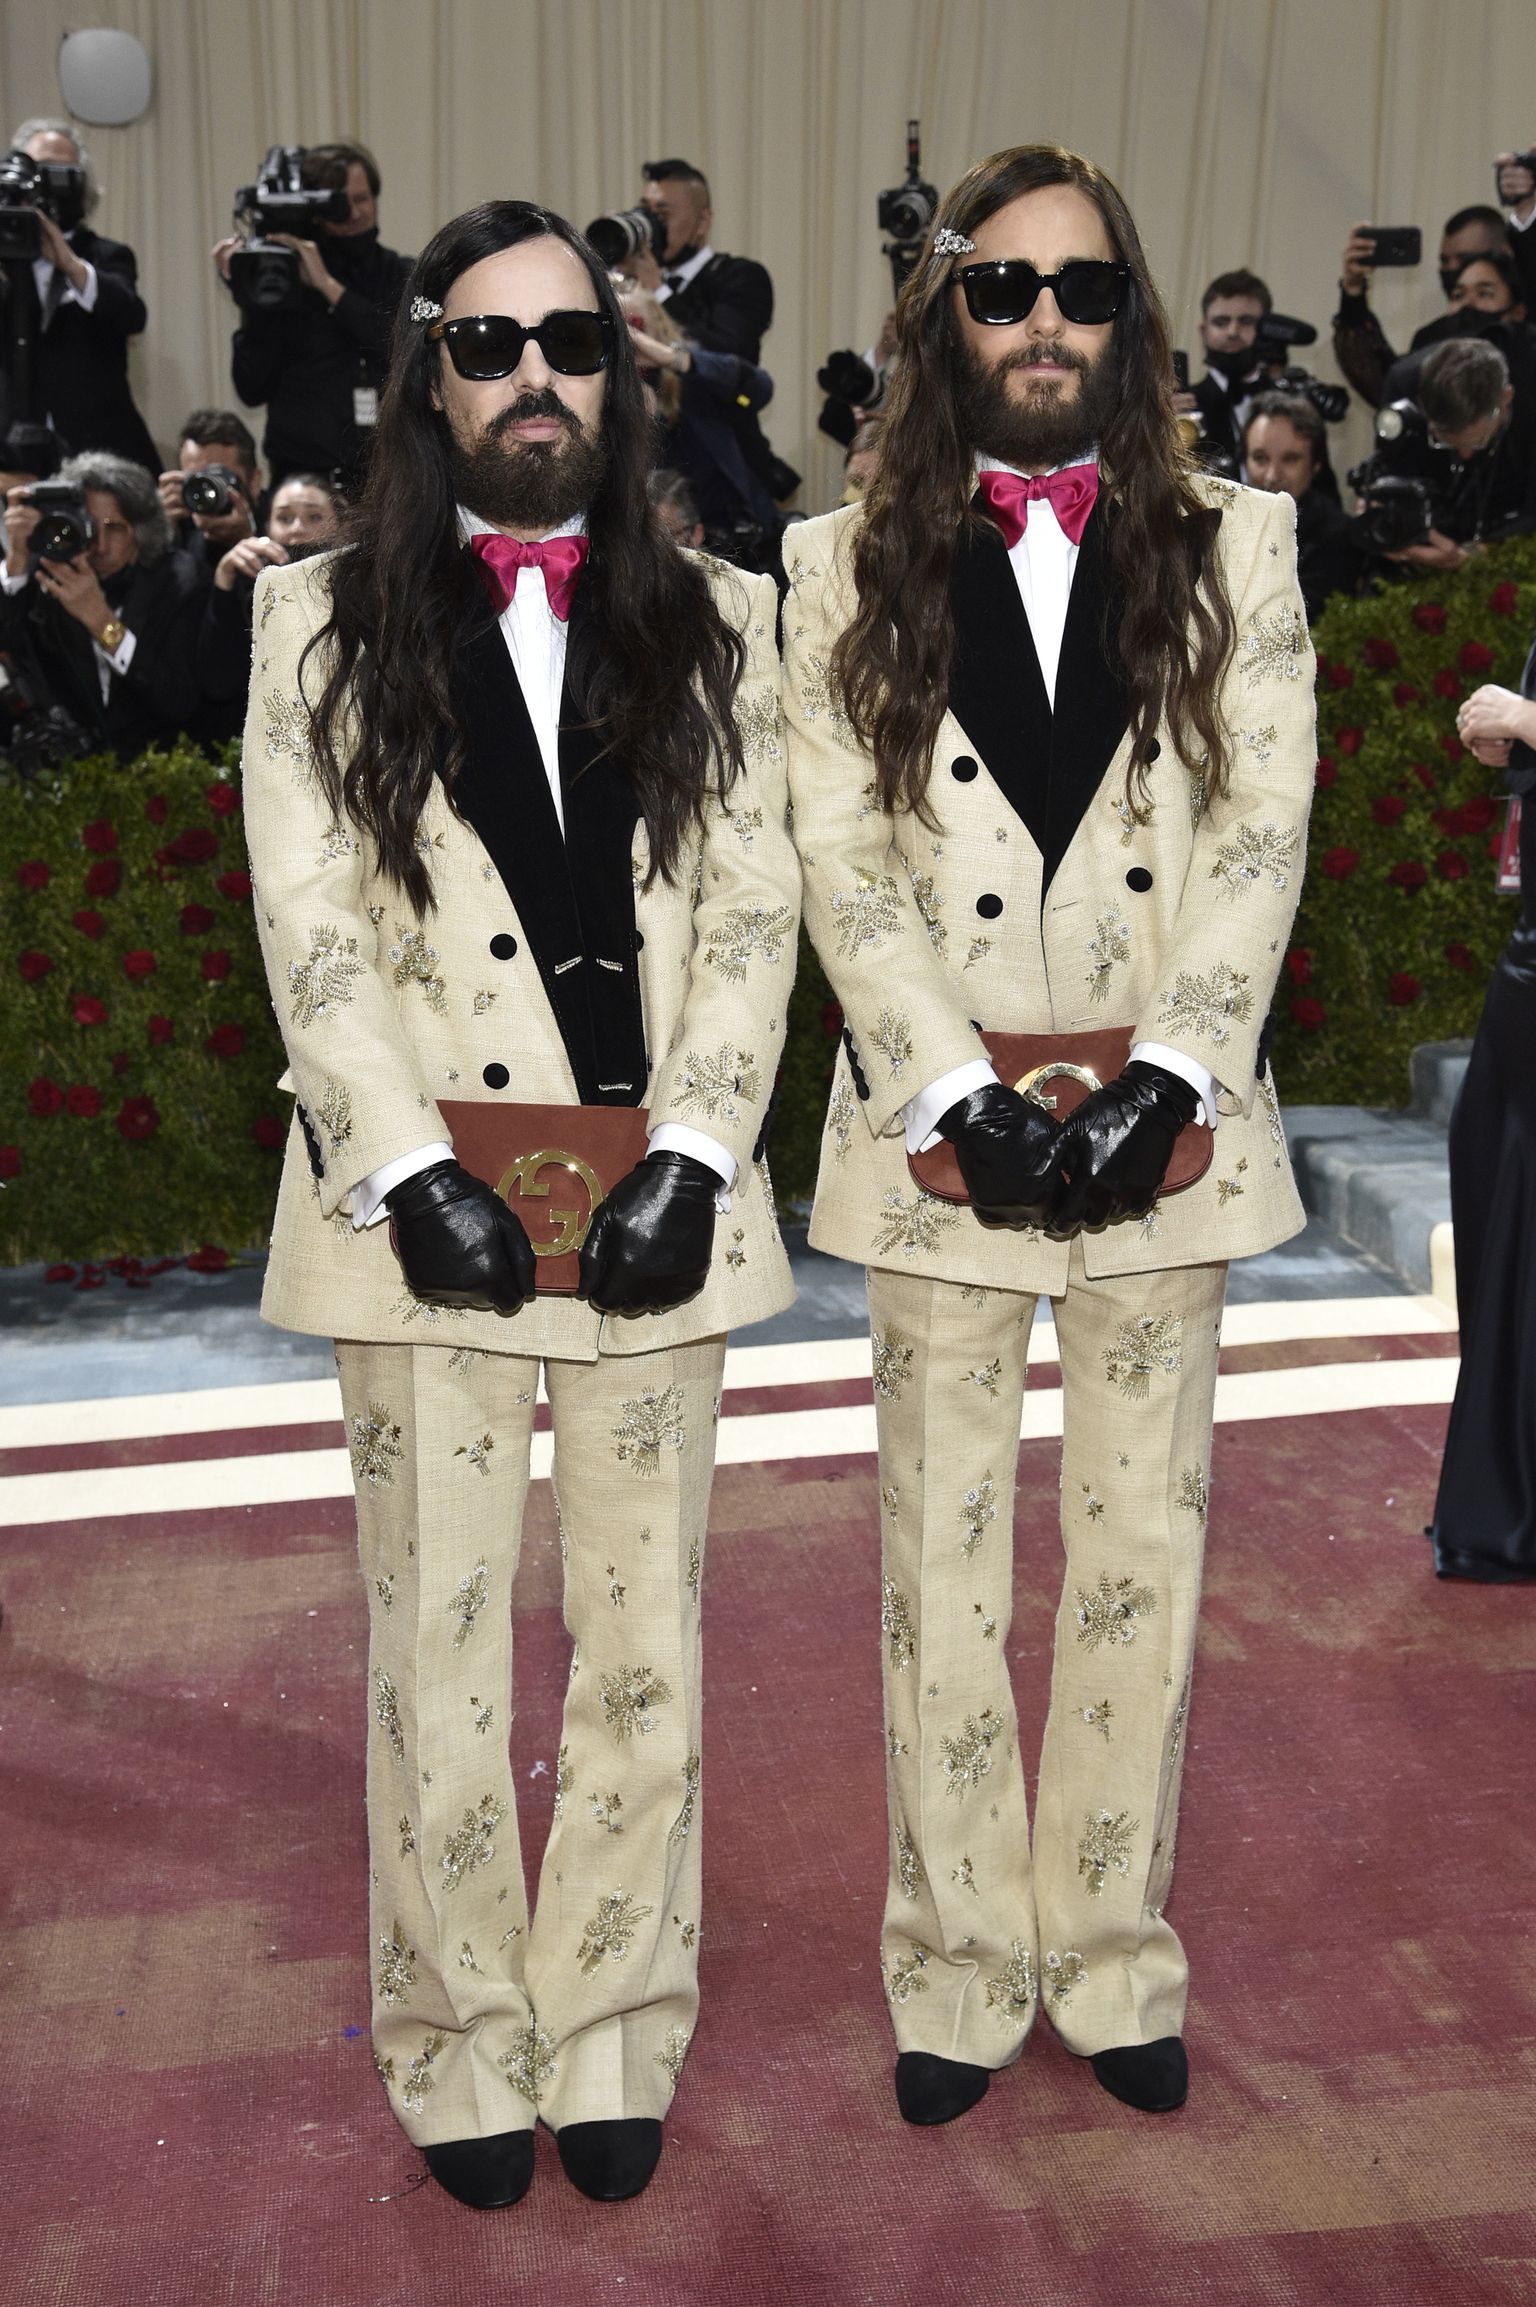 Jared Leto, right, and Alessandro Michele attend The Metropolitan Museum of Art's Costume Institute benefit gala celebrating the opening of the "In America: An Anthology of Fashion" exhibition on Monday, May 2, 2022, in New York. (Photo by Evan Agostini/Invision/AP)